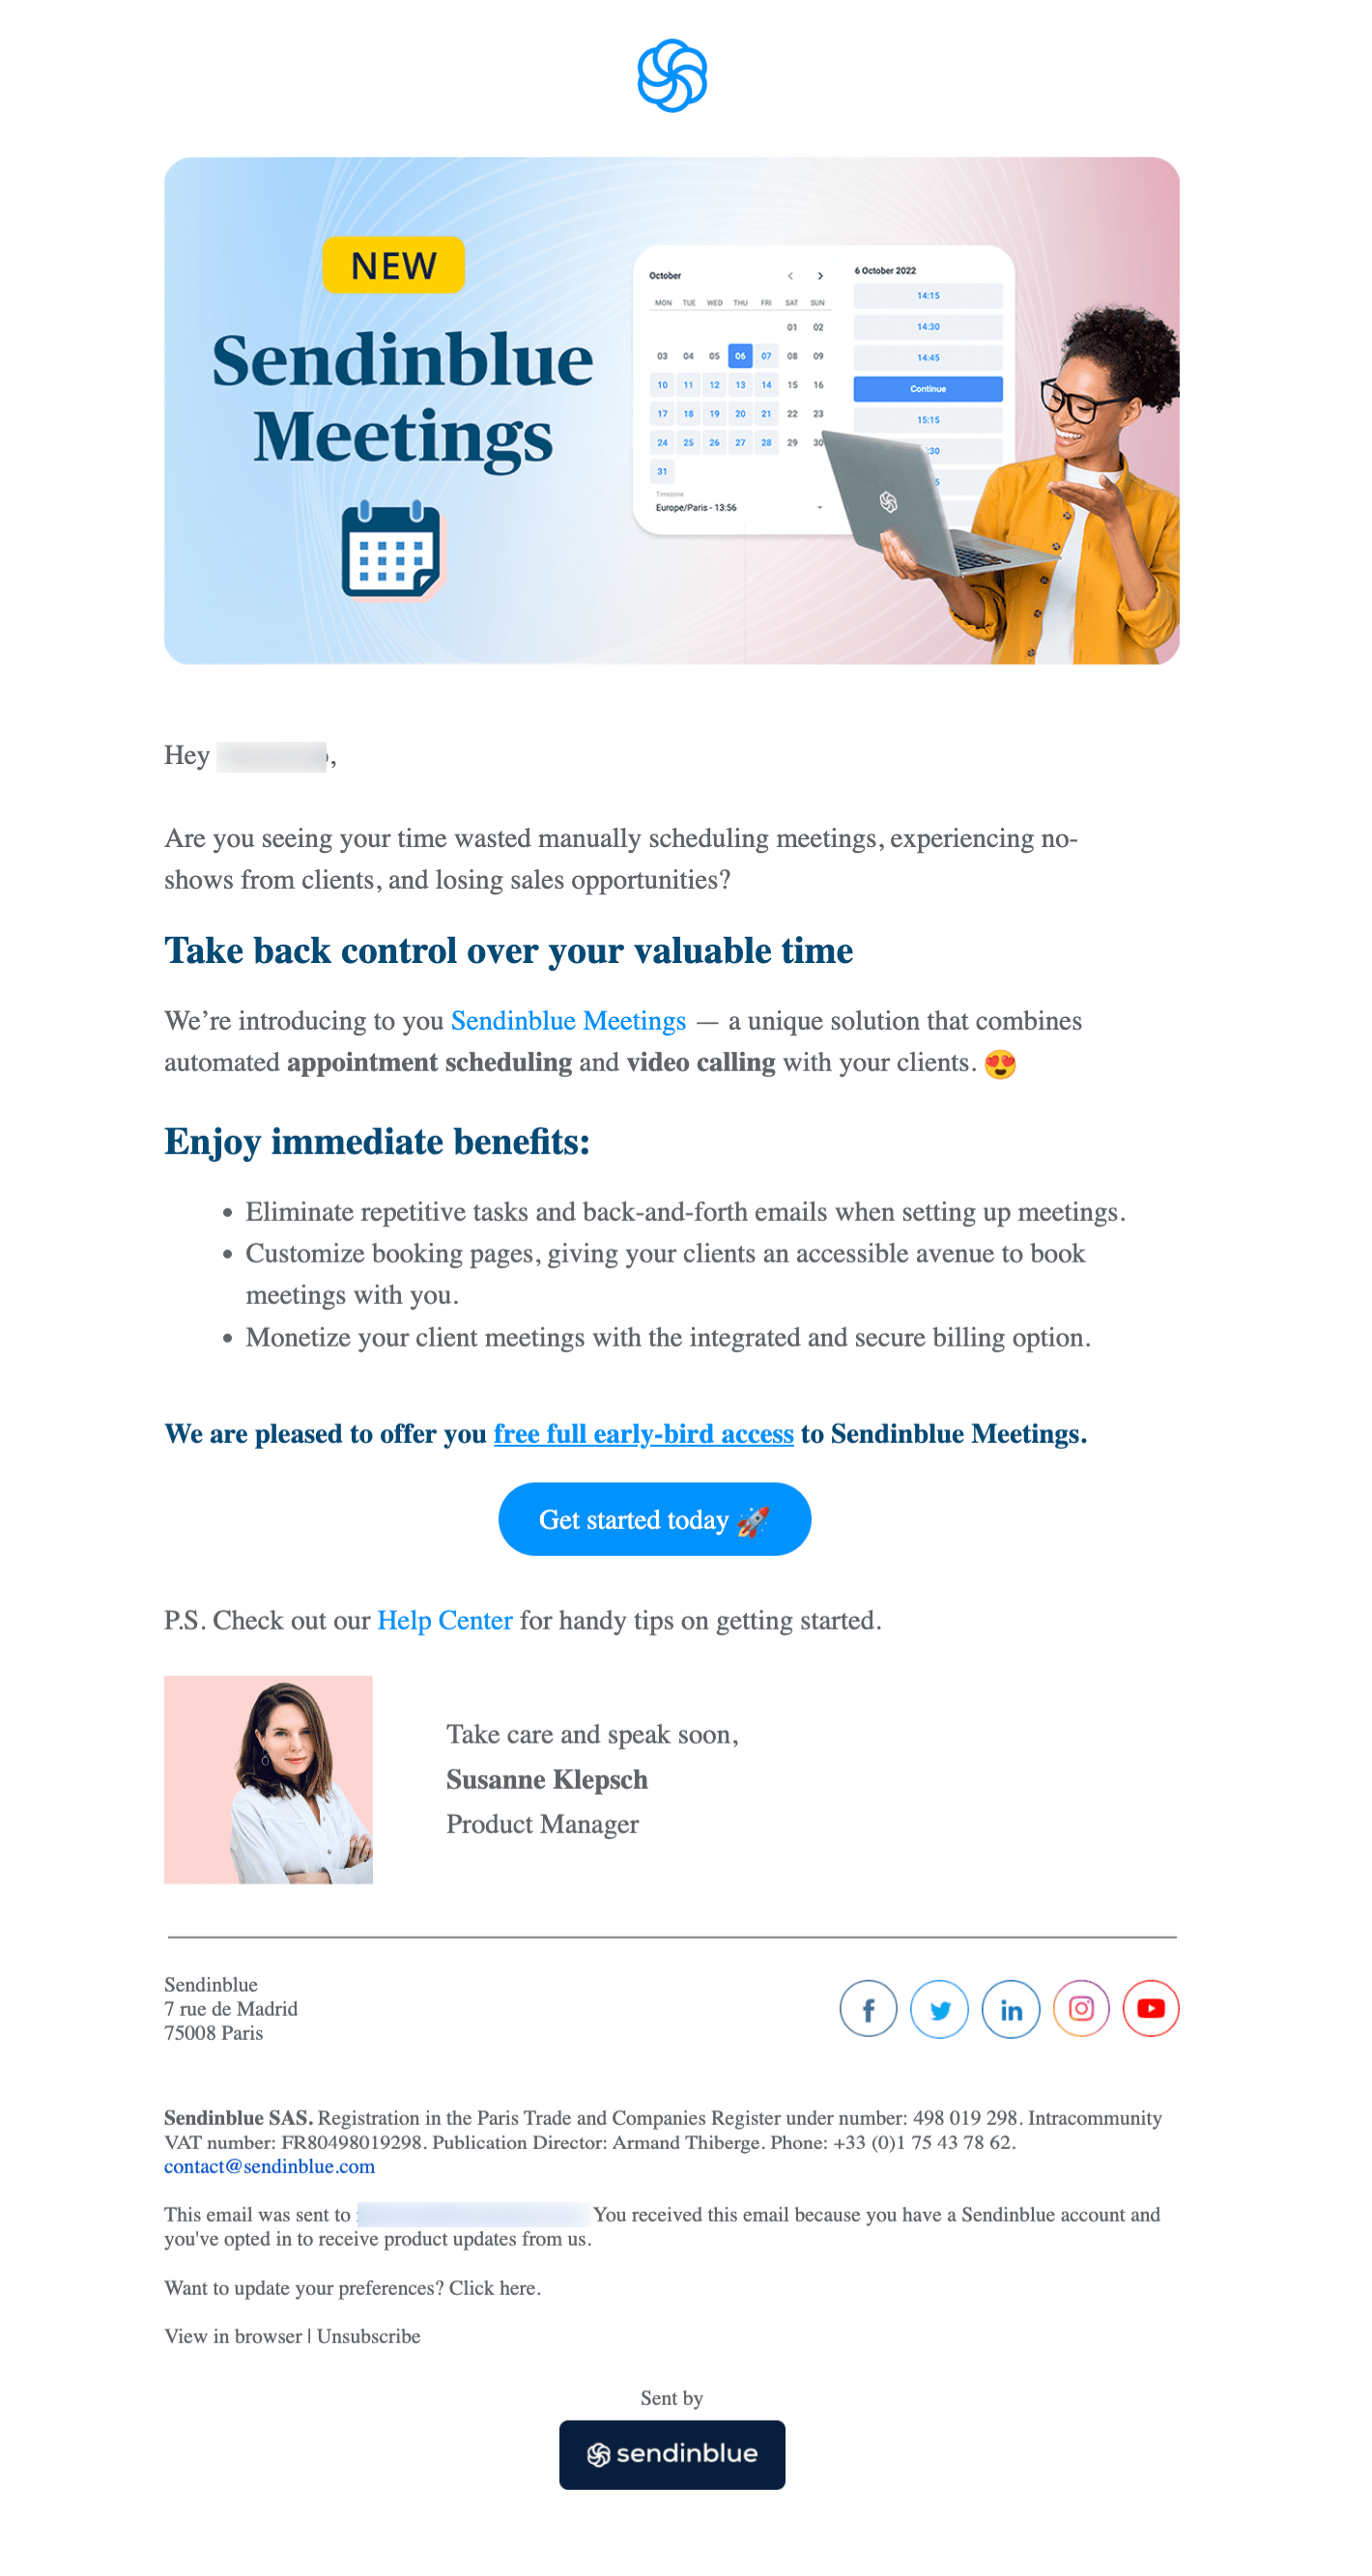 SaaS Product Launch Emails: Screenshot of Sendinblue's launch email